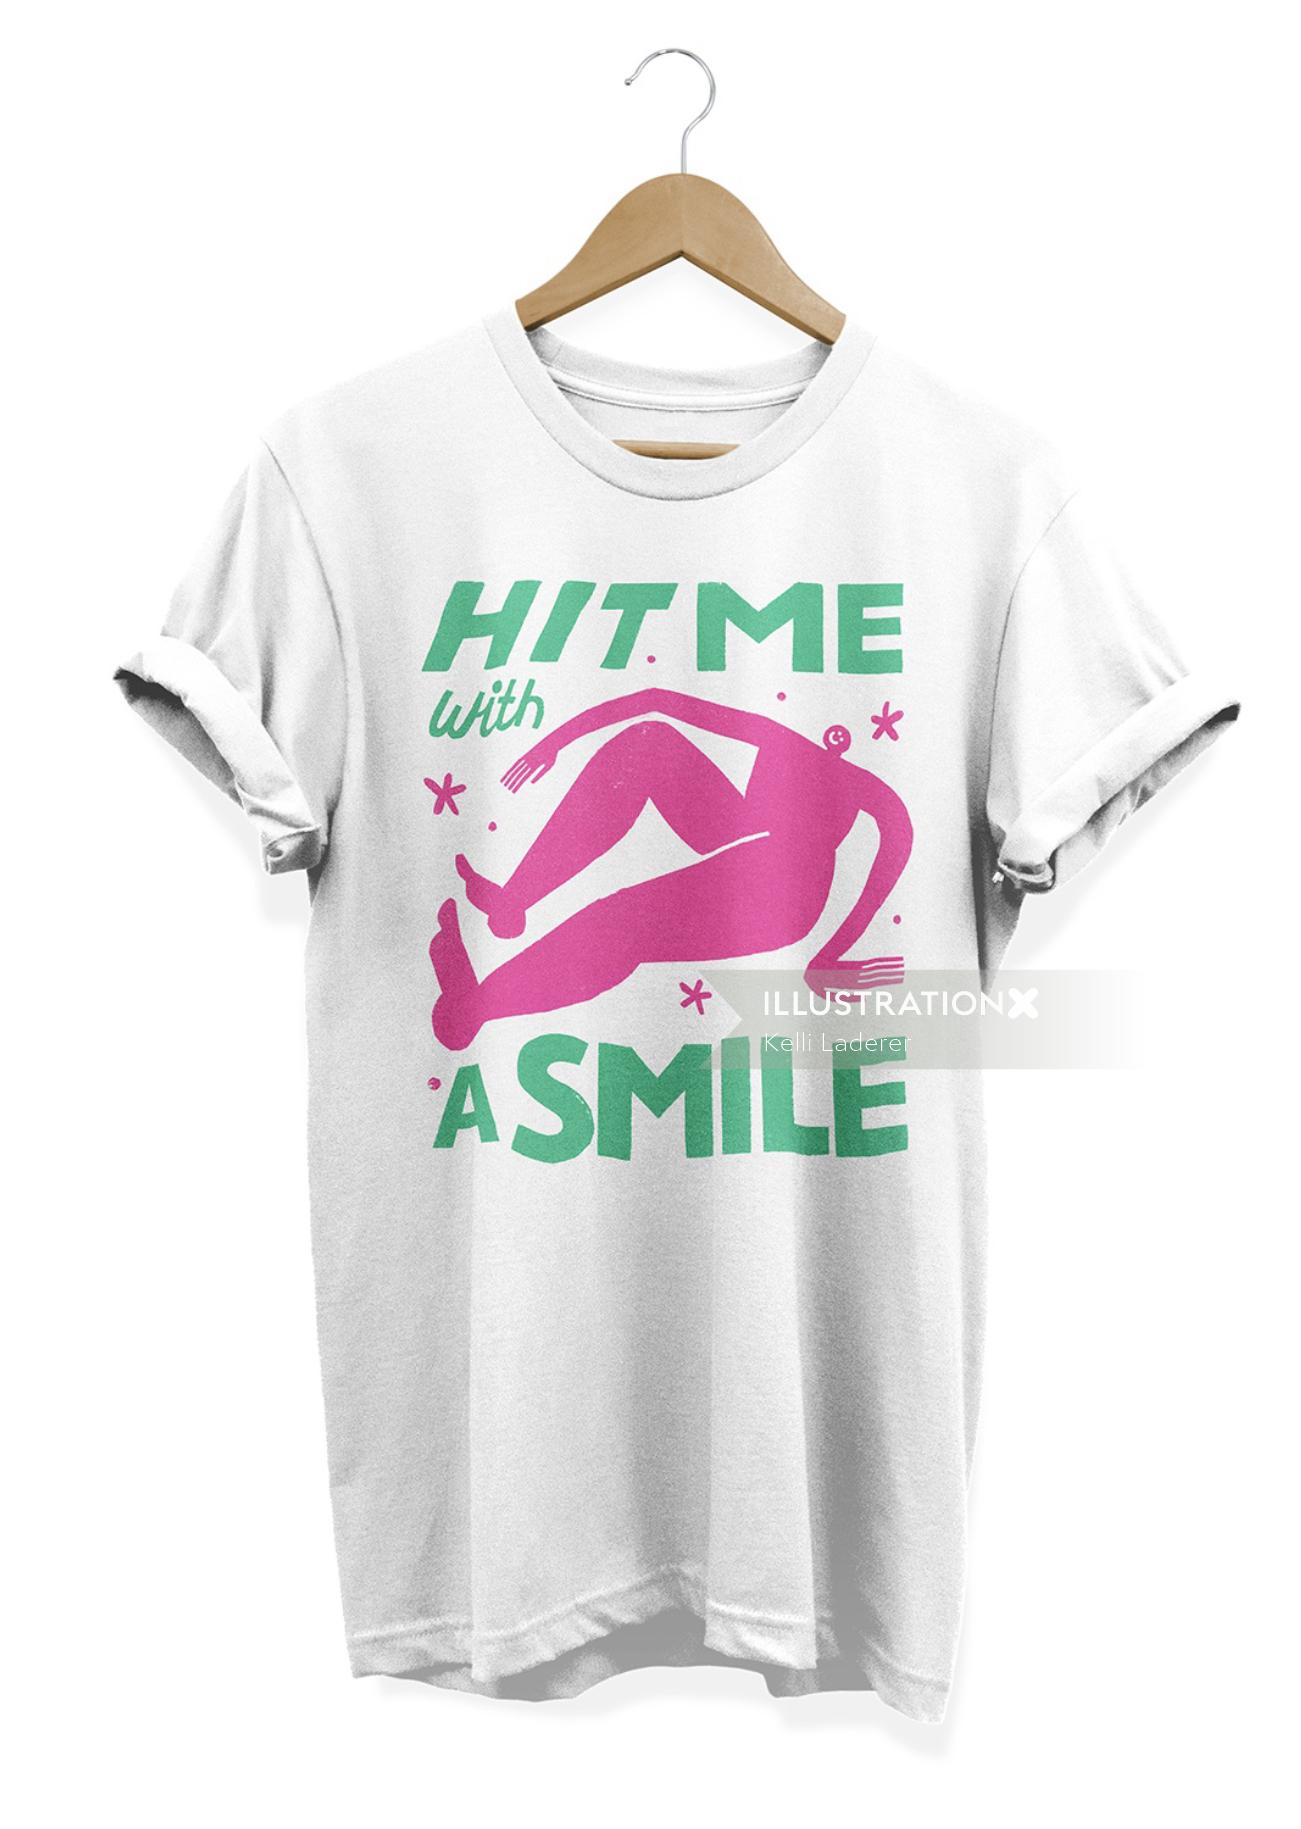 Hit me with smile poster on t-shirt